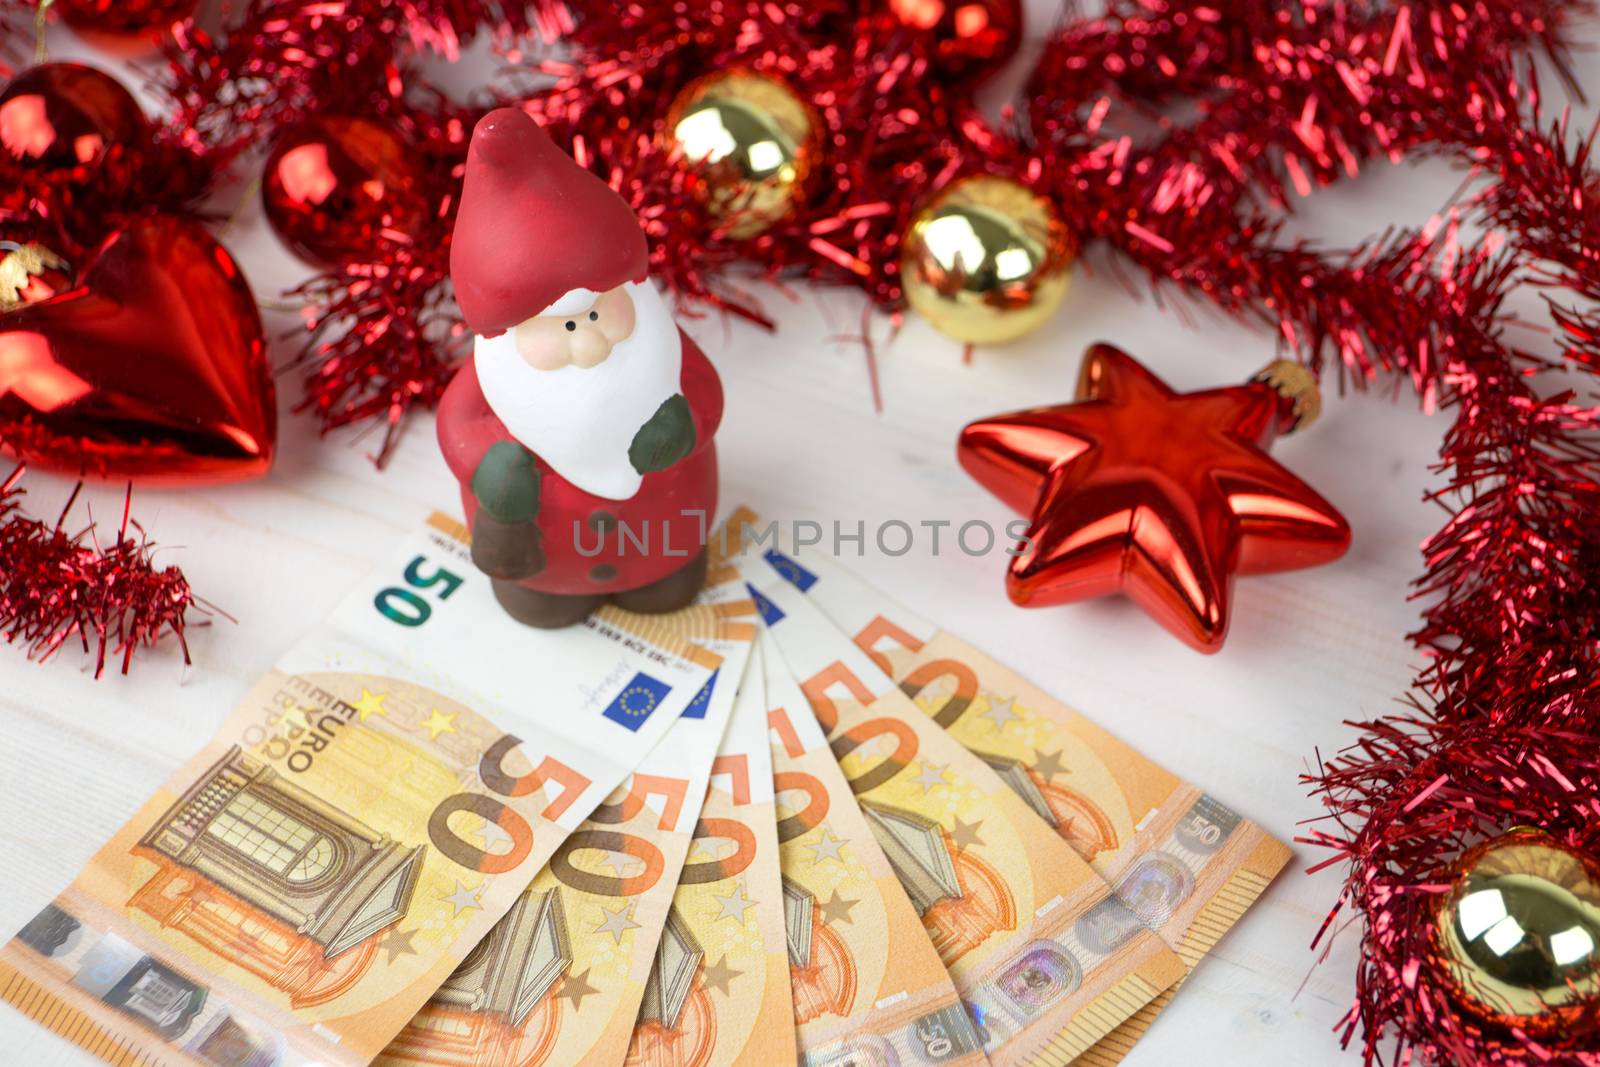 Christmas money business concept: a statuette of Santa Claus on some fifty euro banknotes with red and gold baubles and wreath decoration on light wooden table by robbyfontanesi